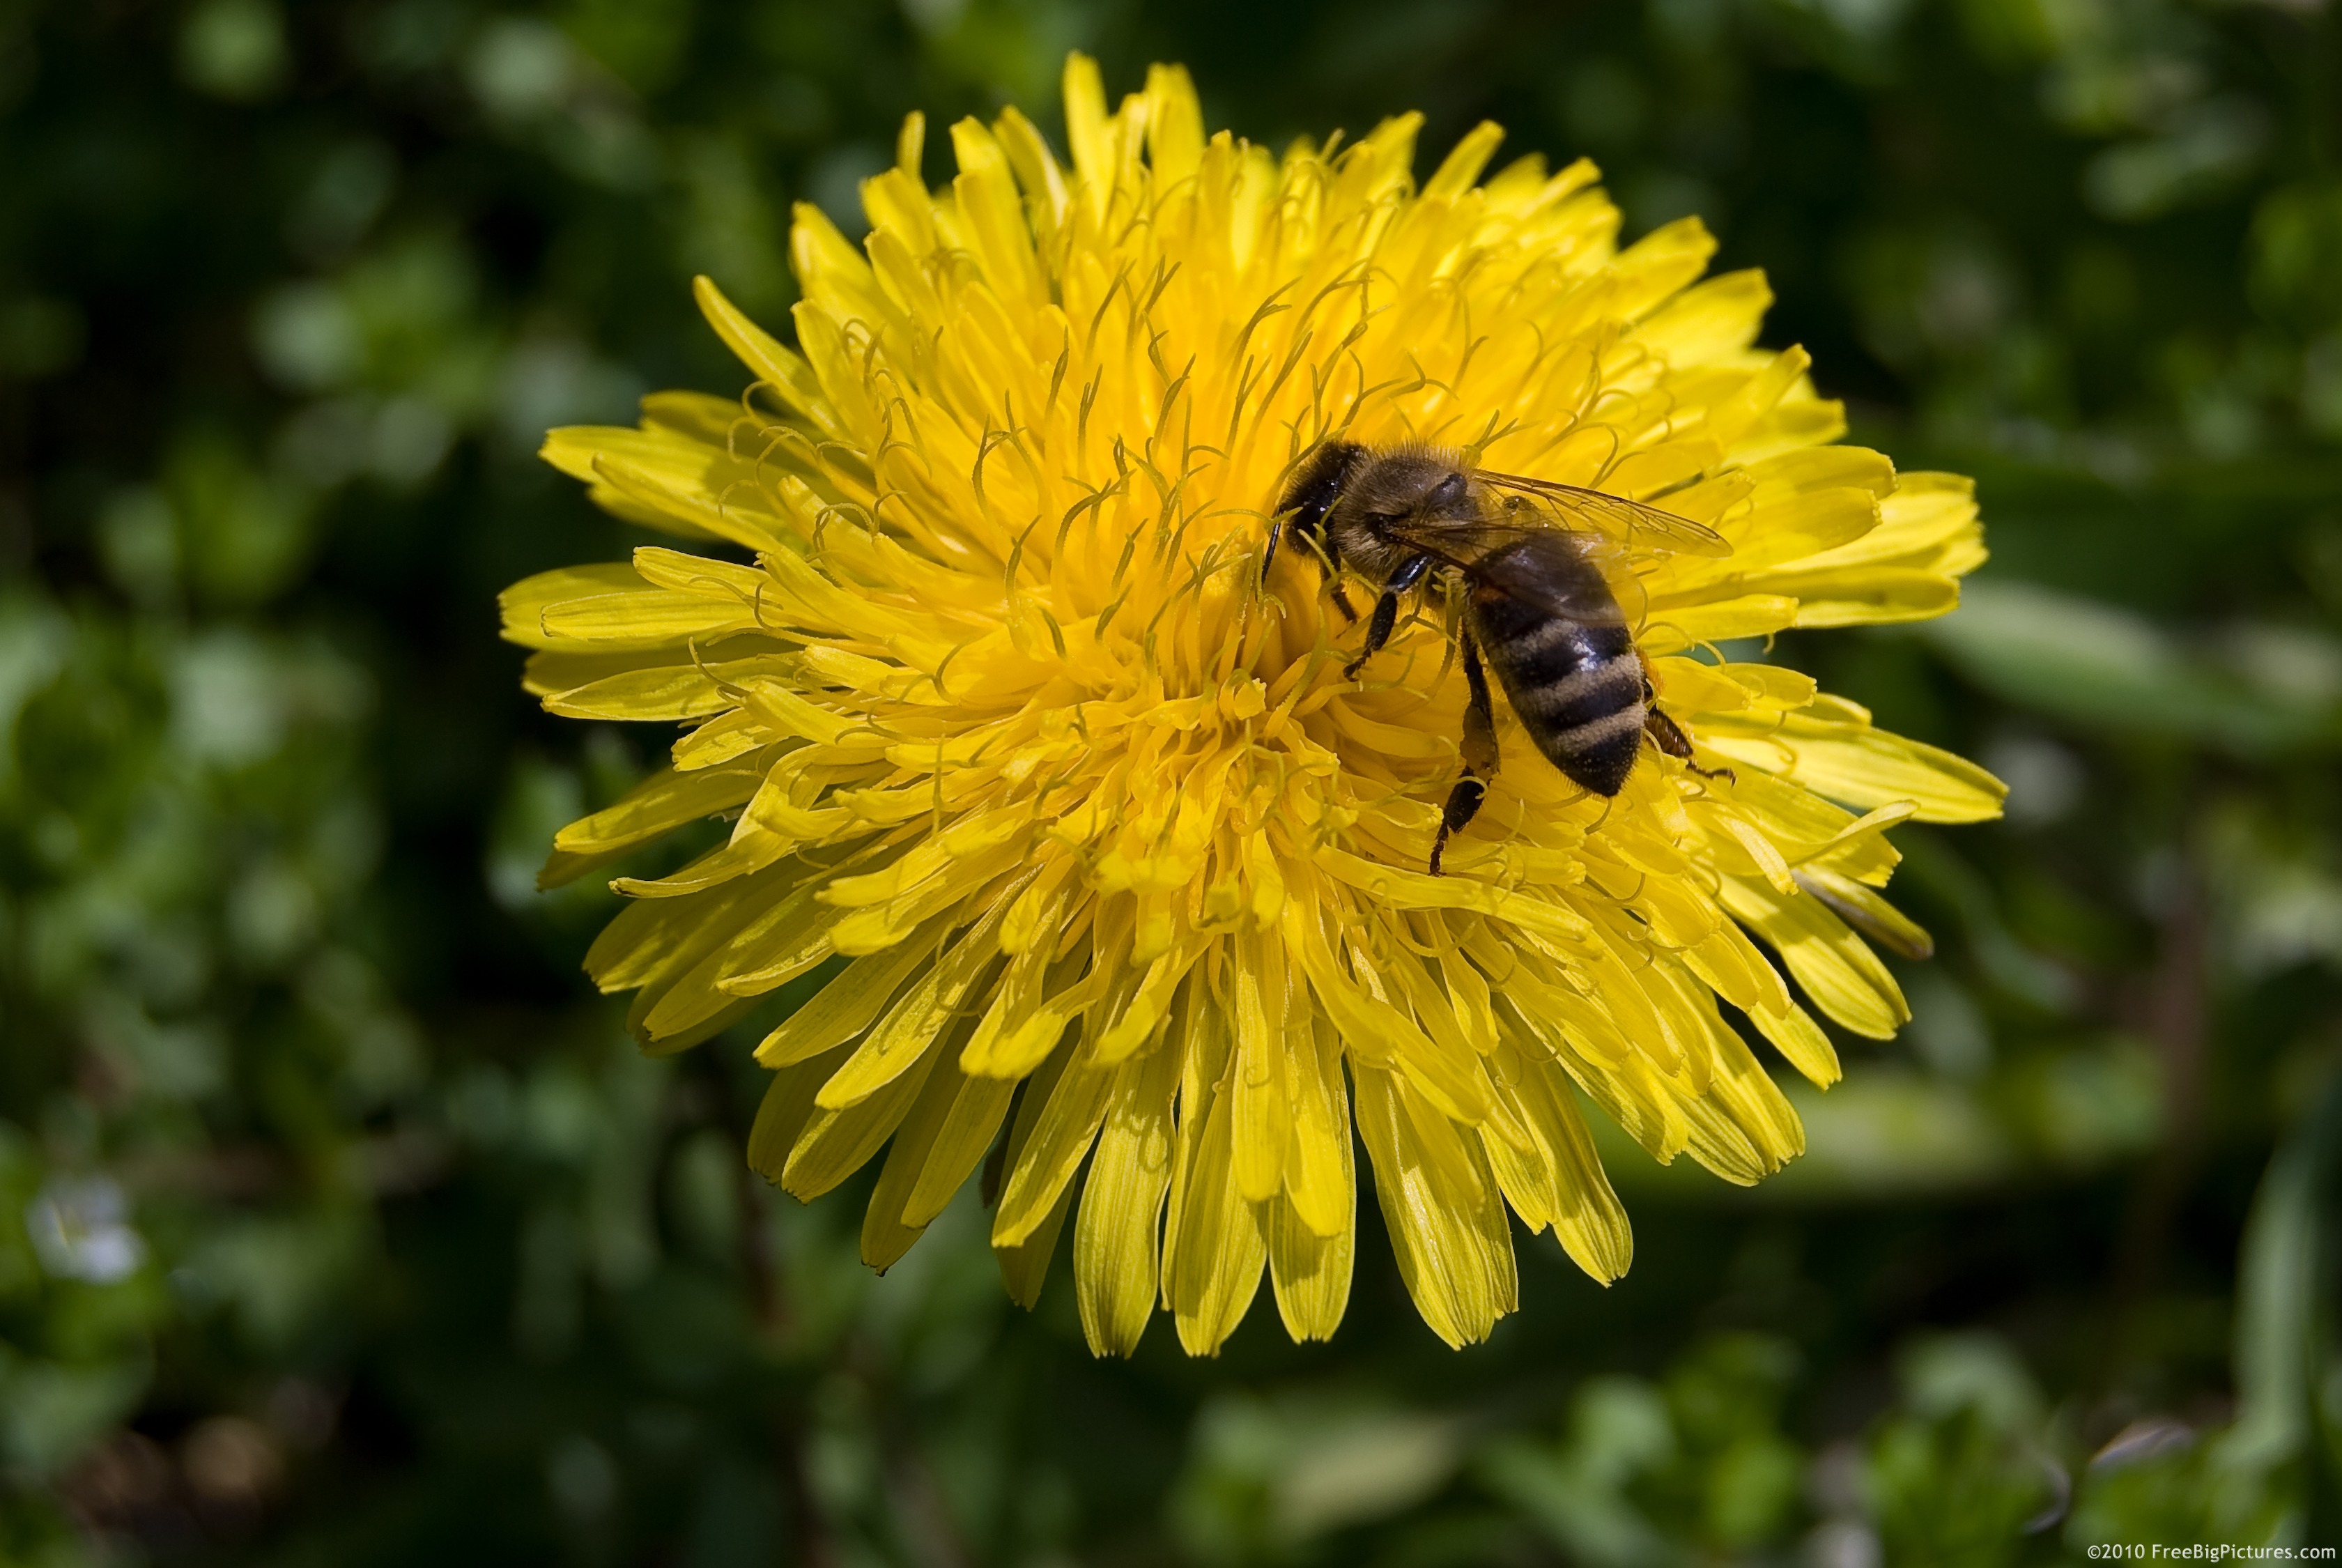 A dandelion pollinated by a bee, in April